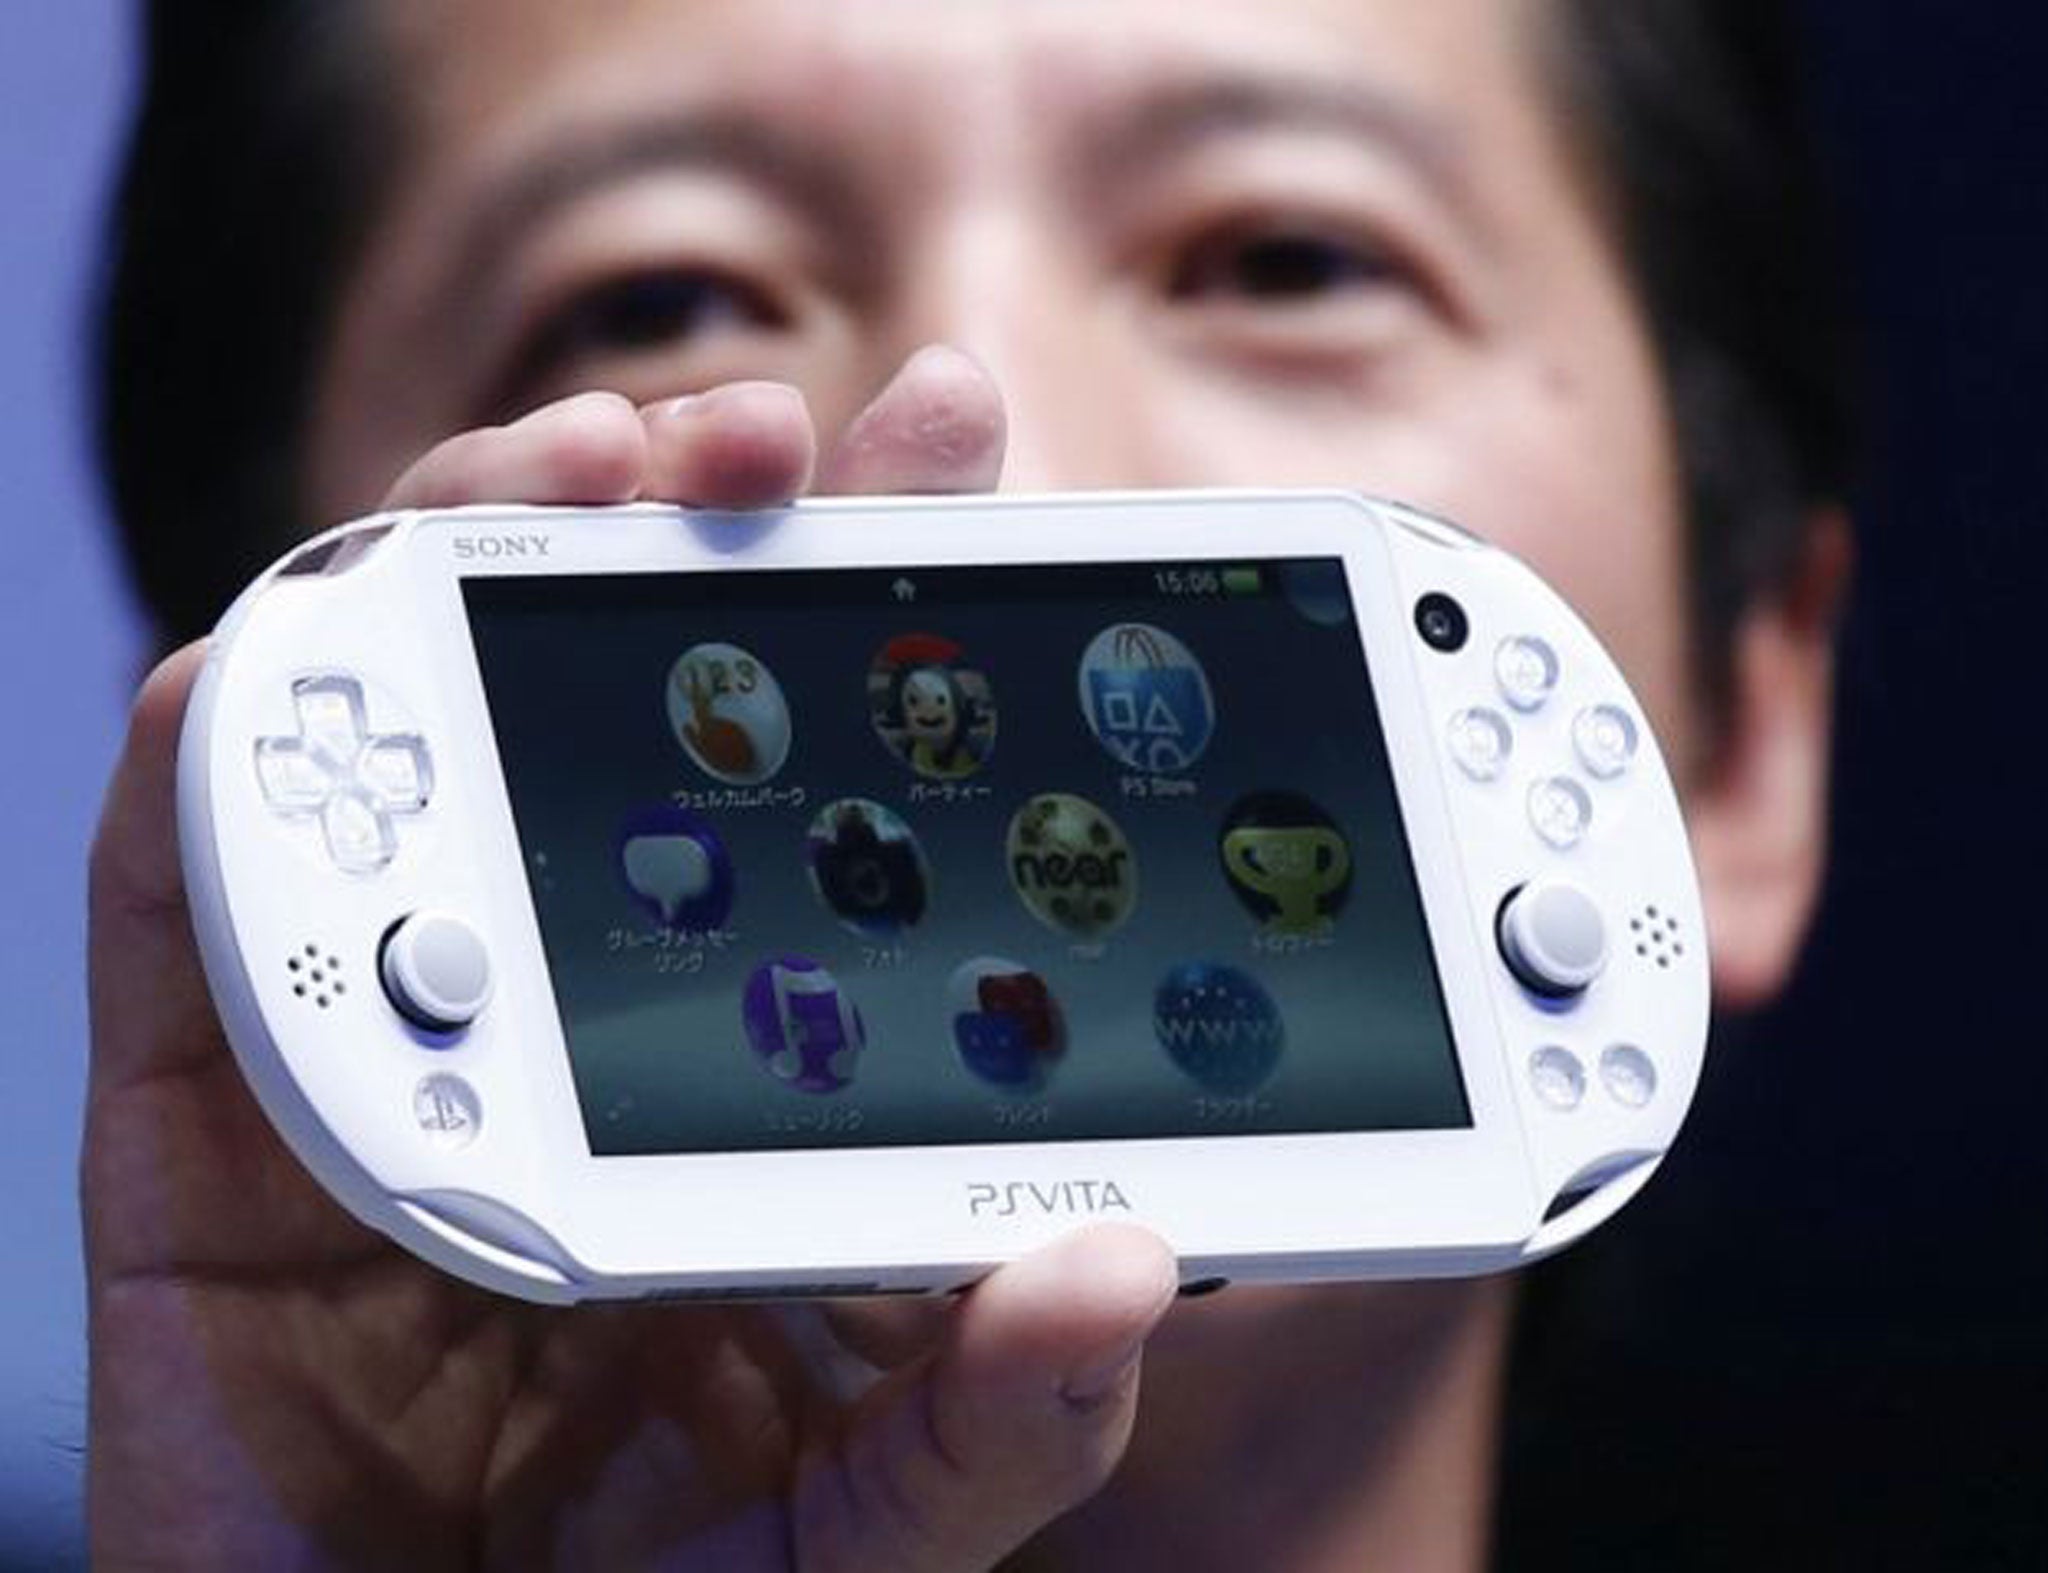 Sony unveils new PS Vita 2000 at Tokyo Game Show | The Independent